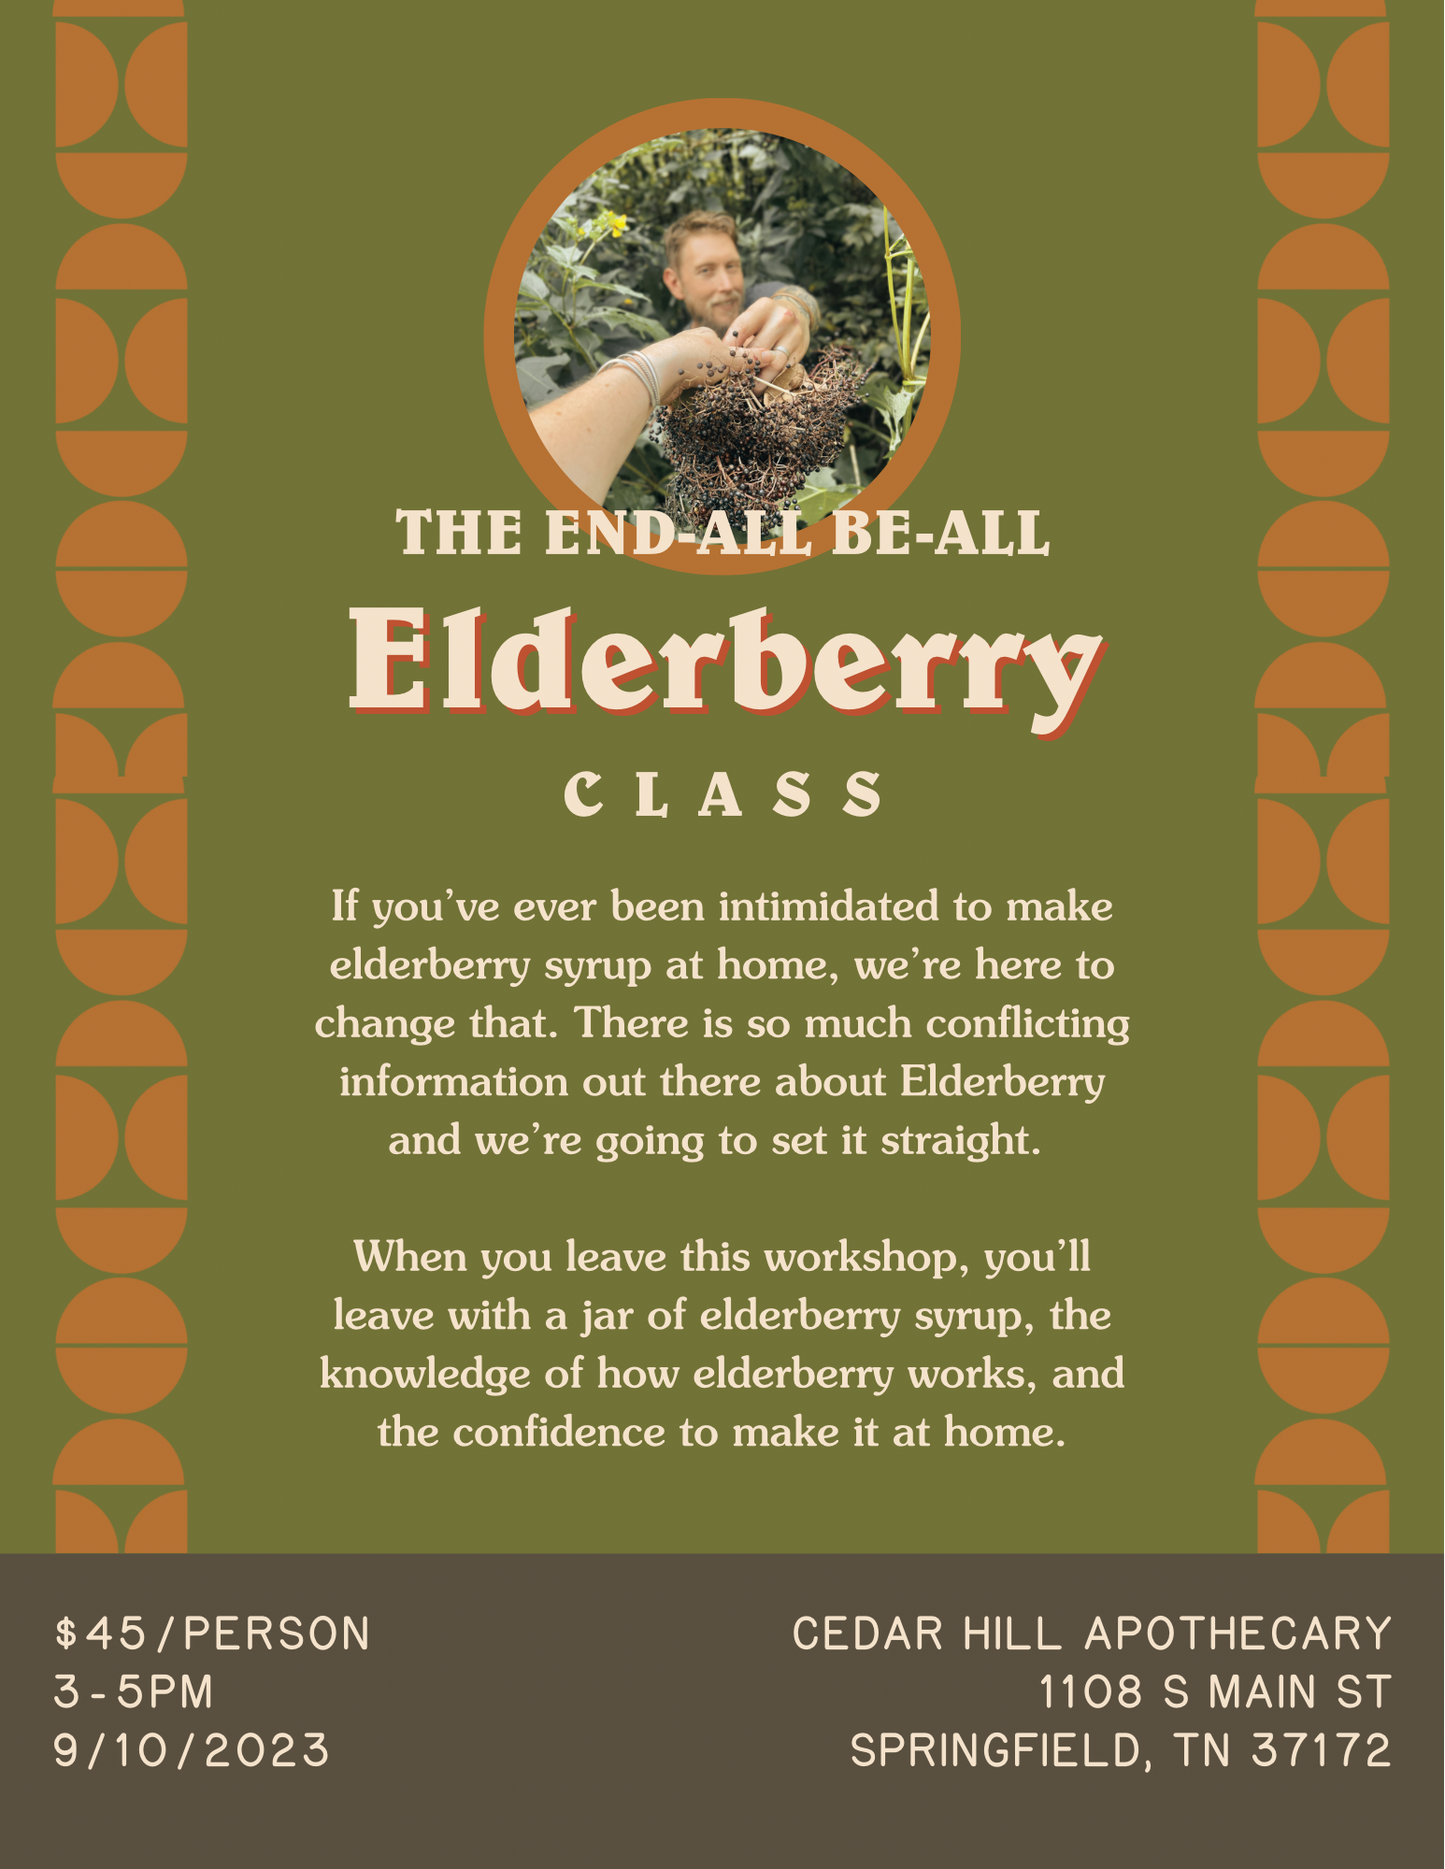 The End-All Be-All Elderberry Workshop